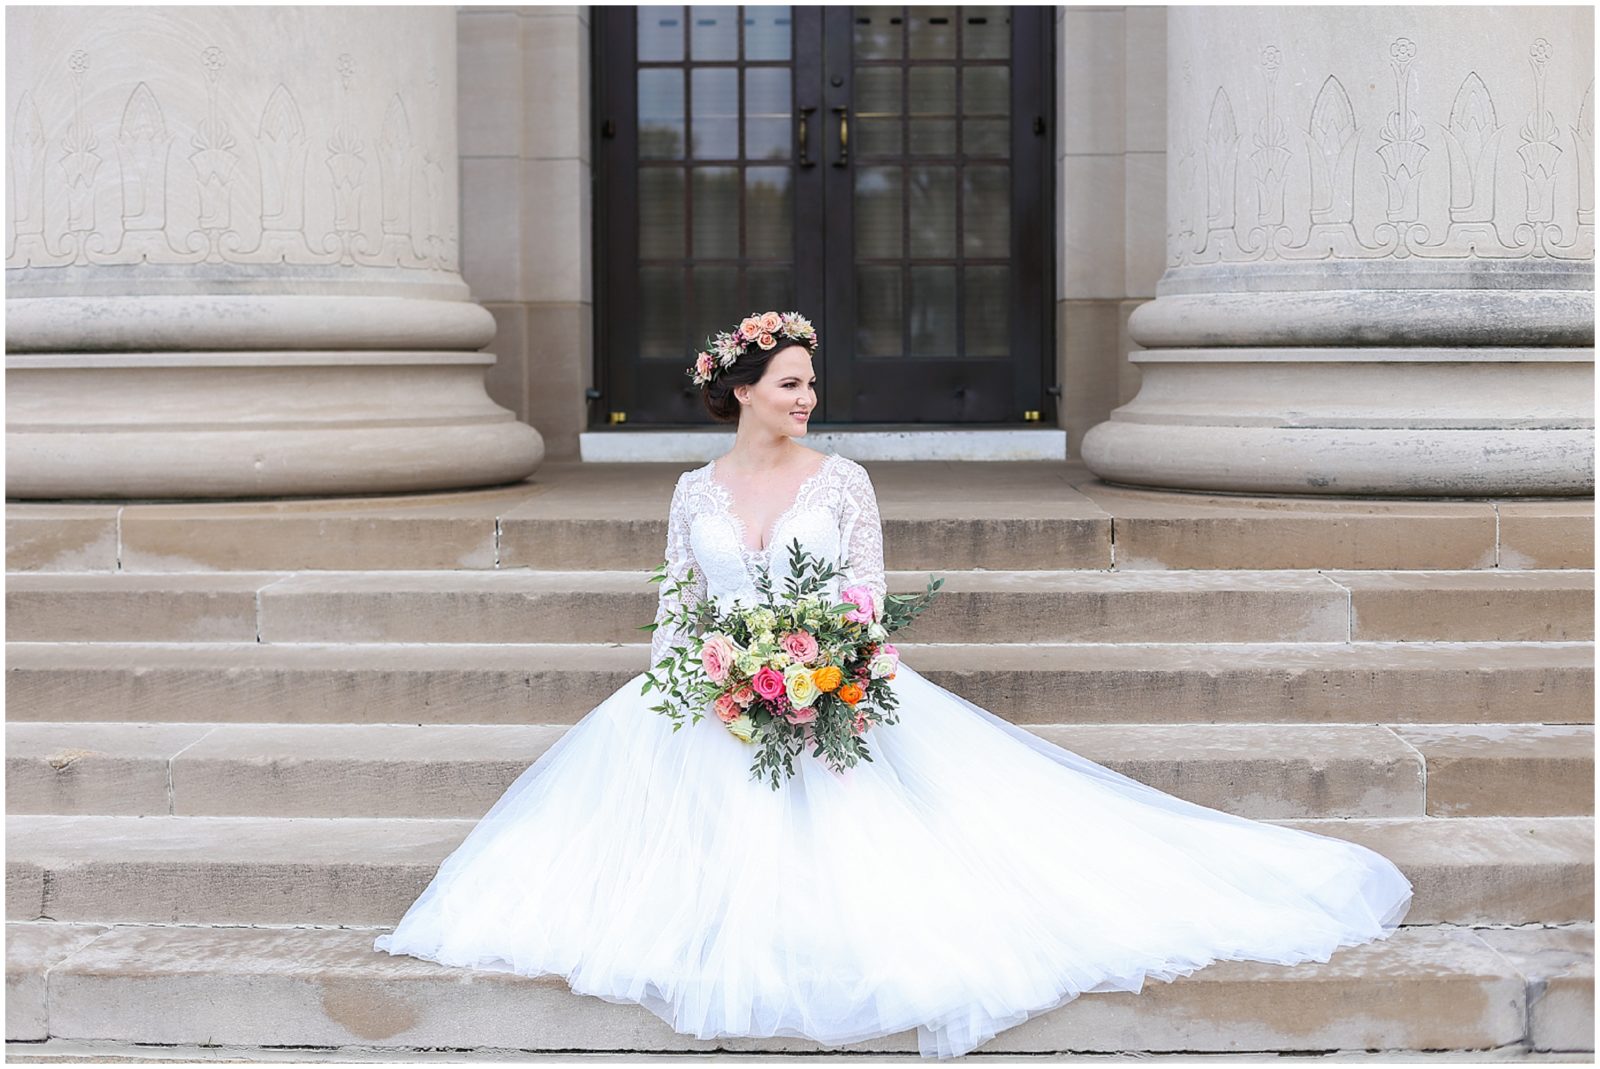 bridal make up by hello lovely kc in kansas city at nelson atkins museum kc wedding photography